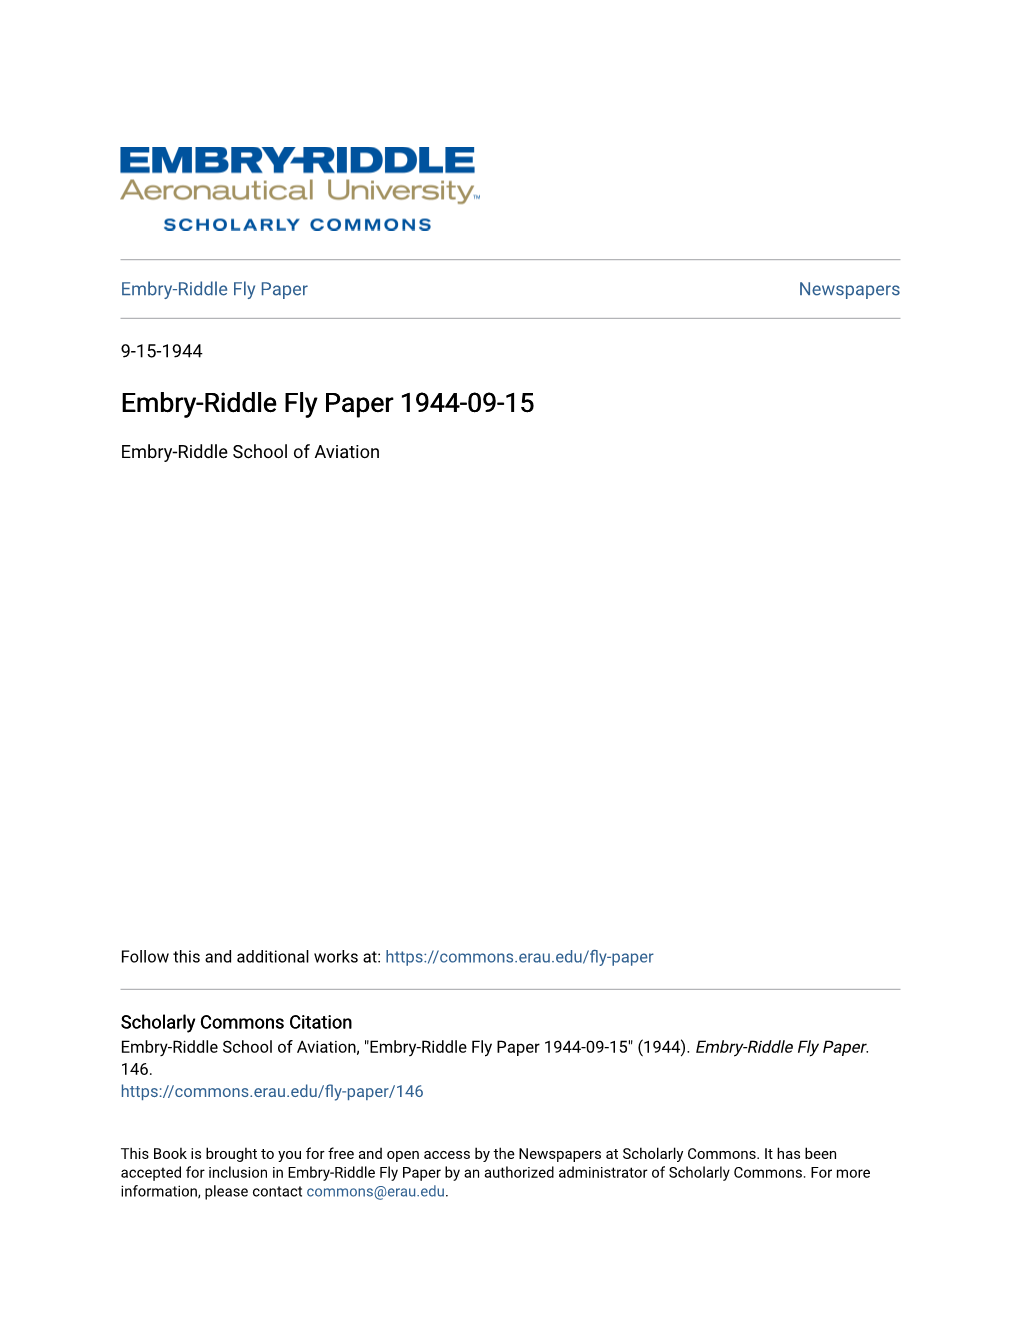 Embry-Riddle Fly Paper 1944-09-15